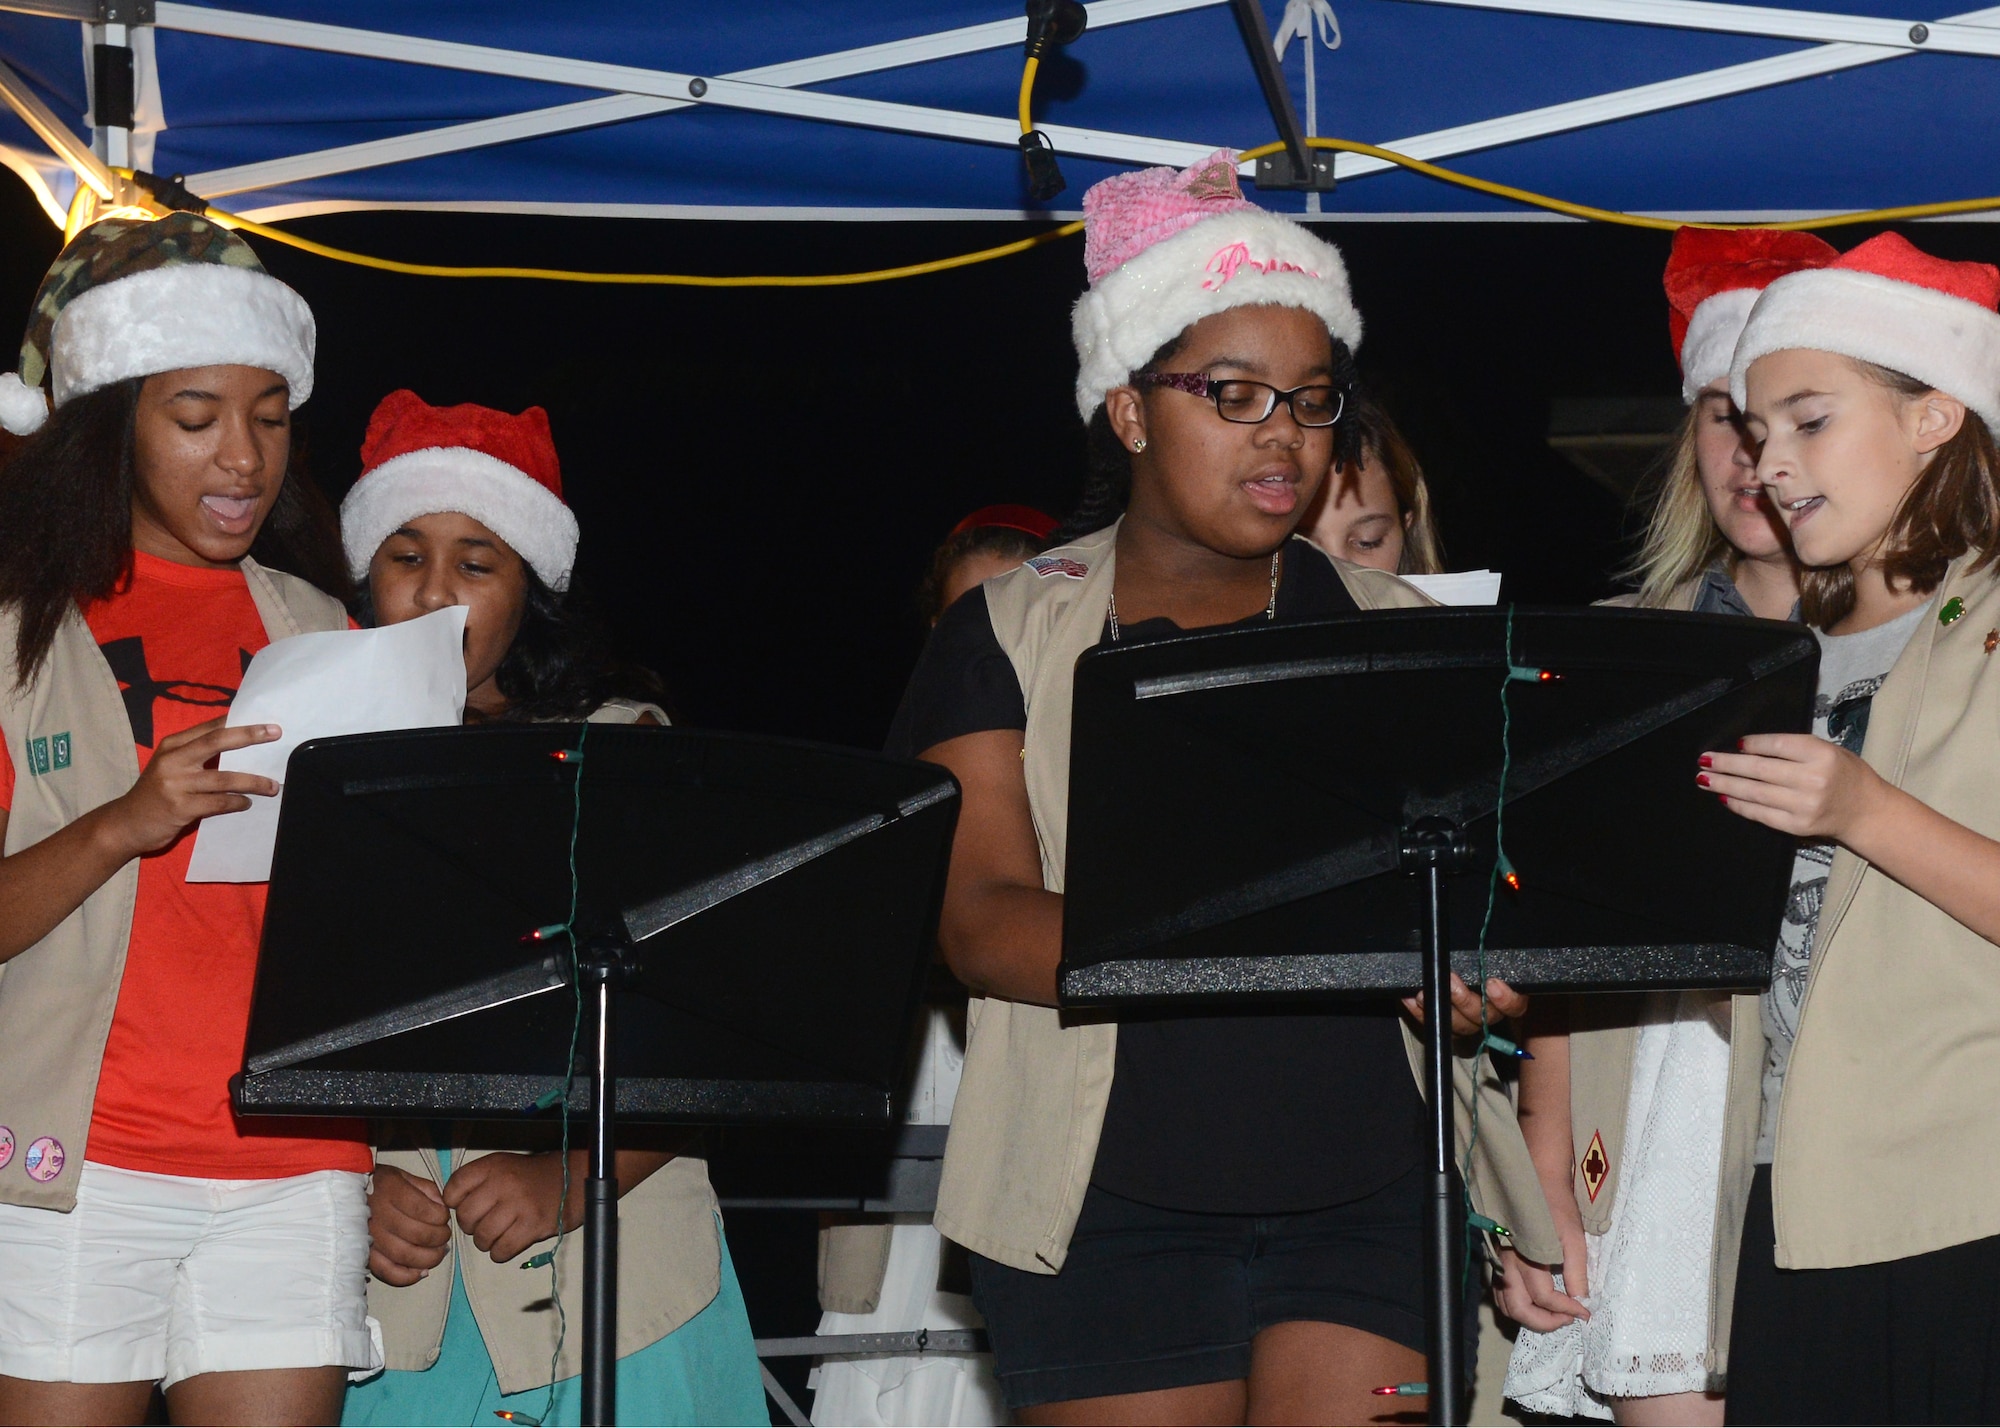 Girl Scouts sing holiday tunes for Team Andersen during the annual base Rota Walk Dec. 12, 2015, at Andersen Air Force Base, Guam. Hundreds of military members and civilians attended the event which is held every December to showcase holiday decorations in the base housing area on Rota Drive. (U.S. Air Force photo/Airman 1st Class Arielle Vasquez)